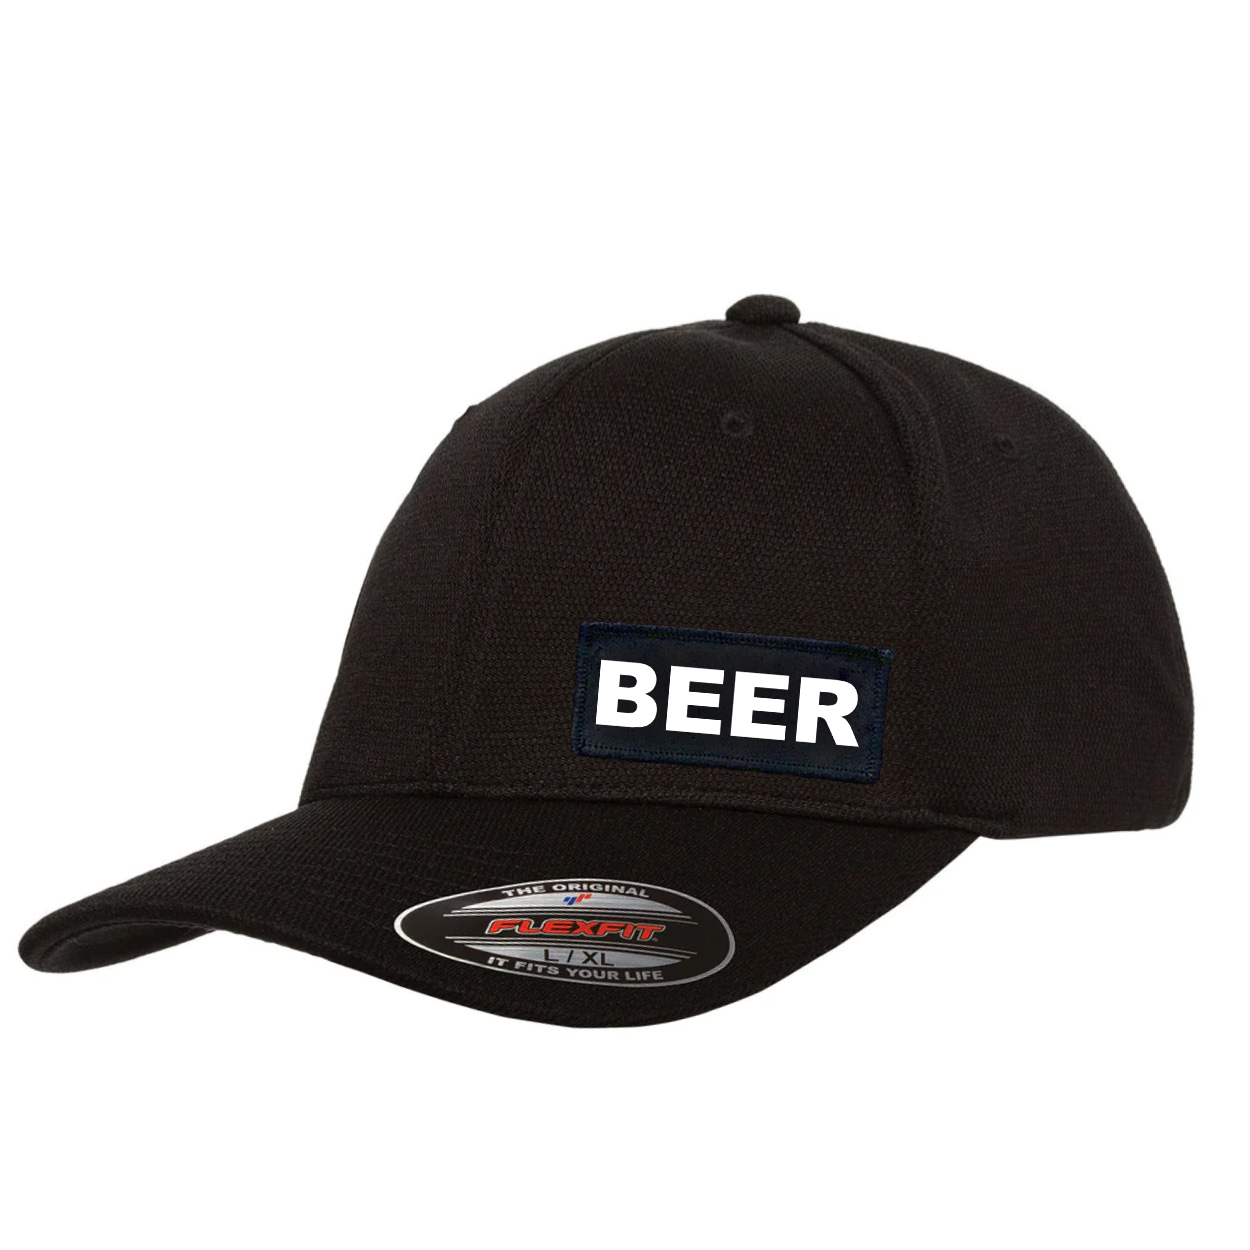 Beer Brand Logo Night Out Woven Patch Flex-Fit Hat Black 